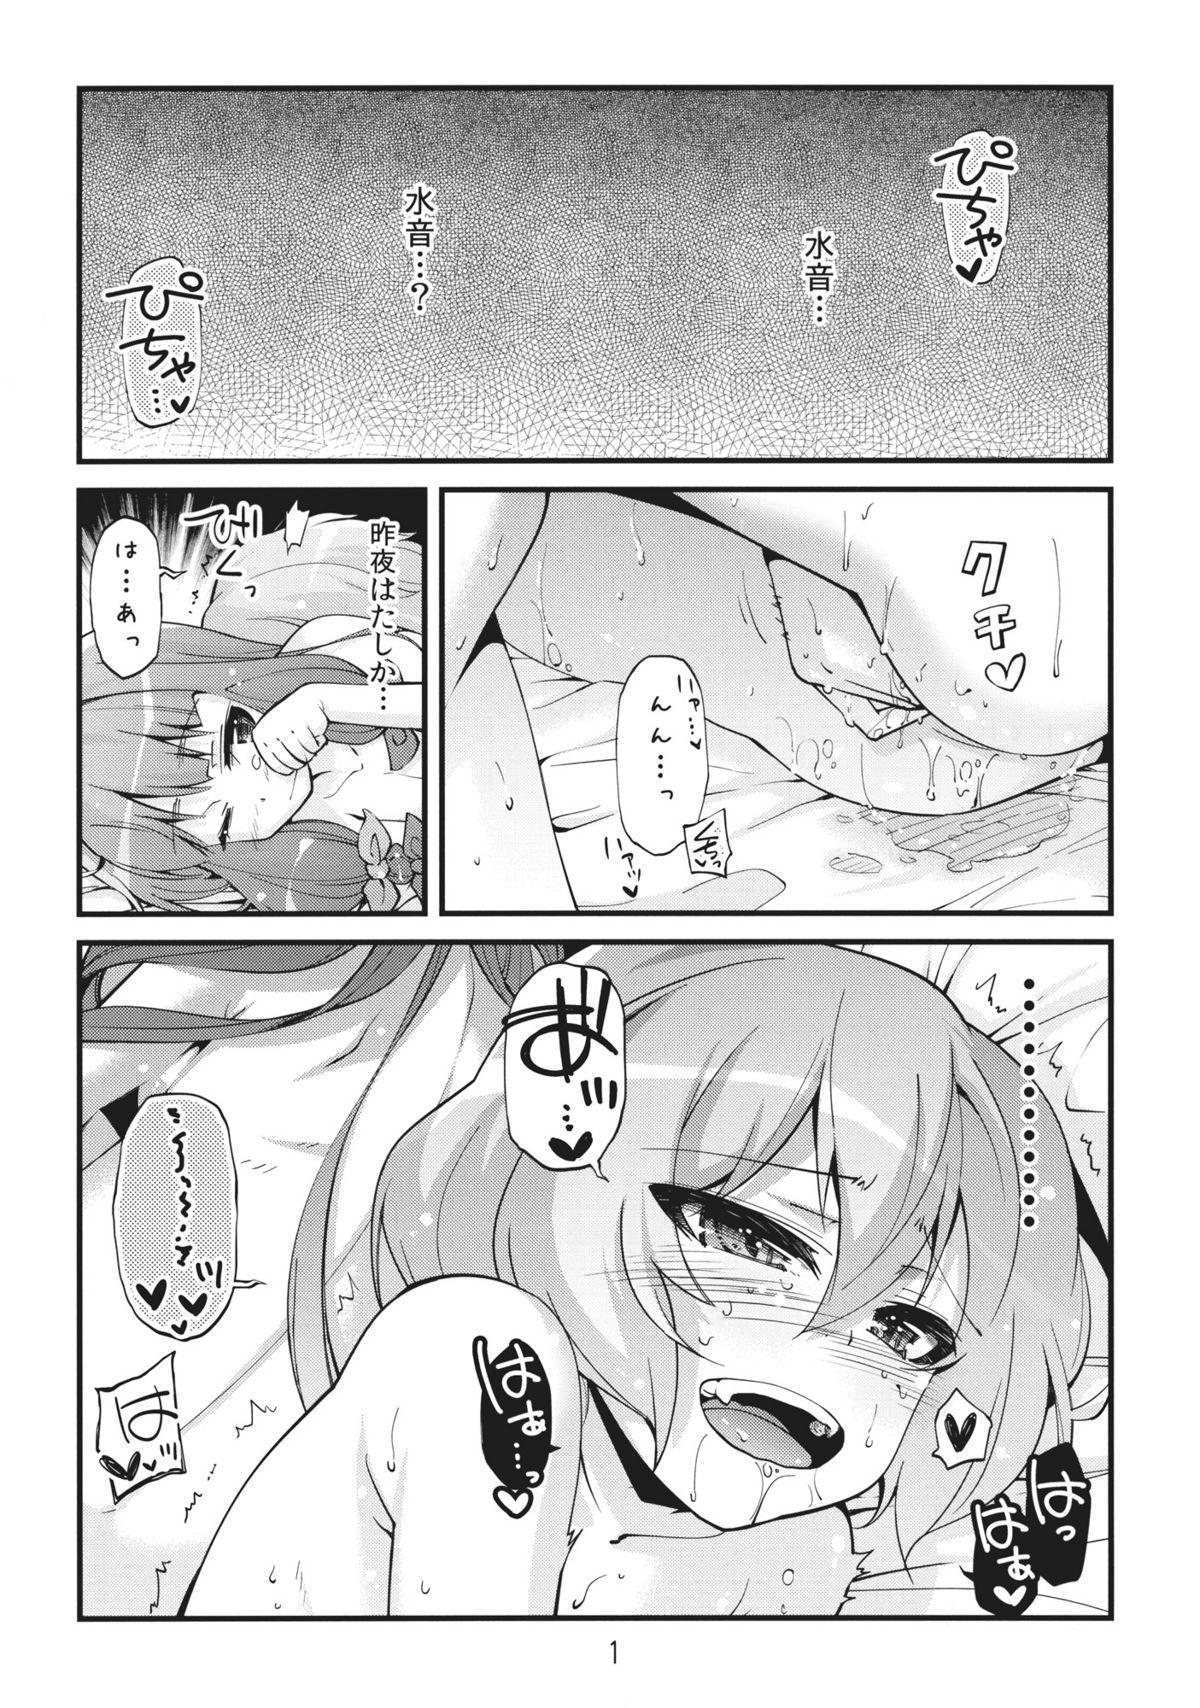 Joven kiss kiss kiss - Touhou project Brother - Page 3